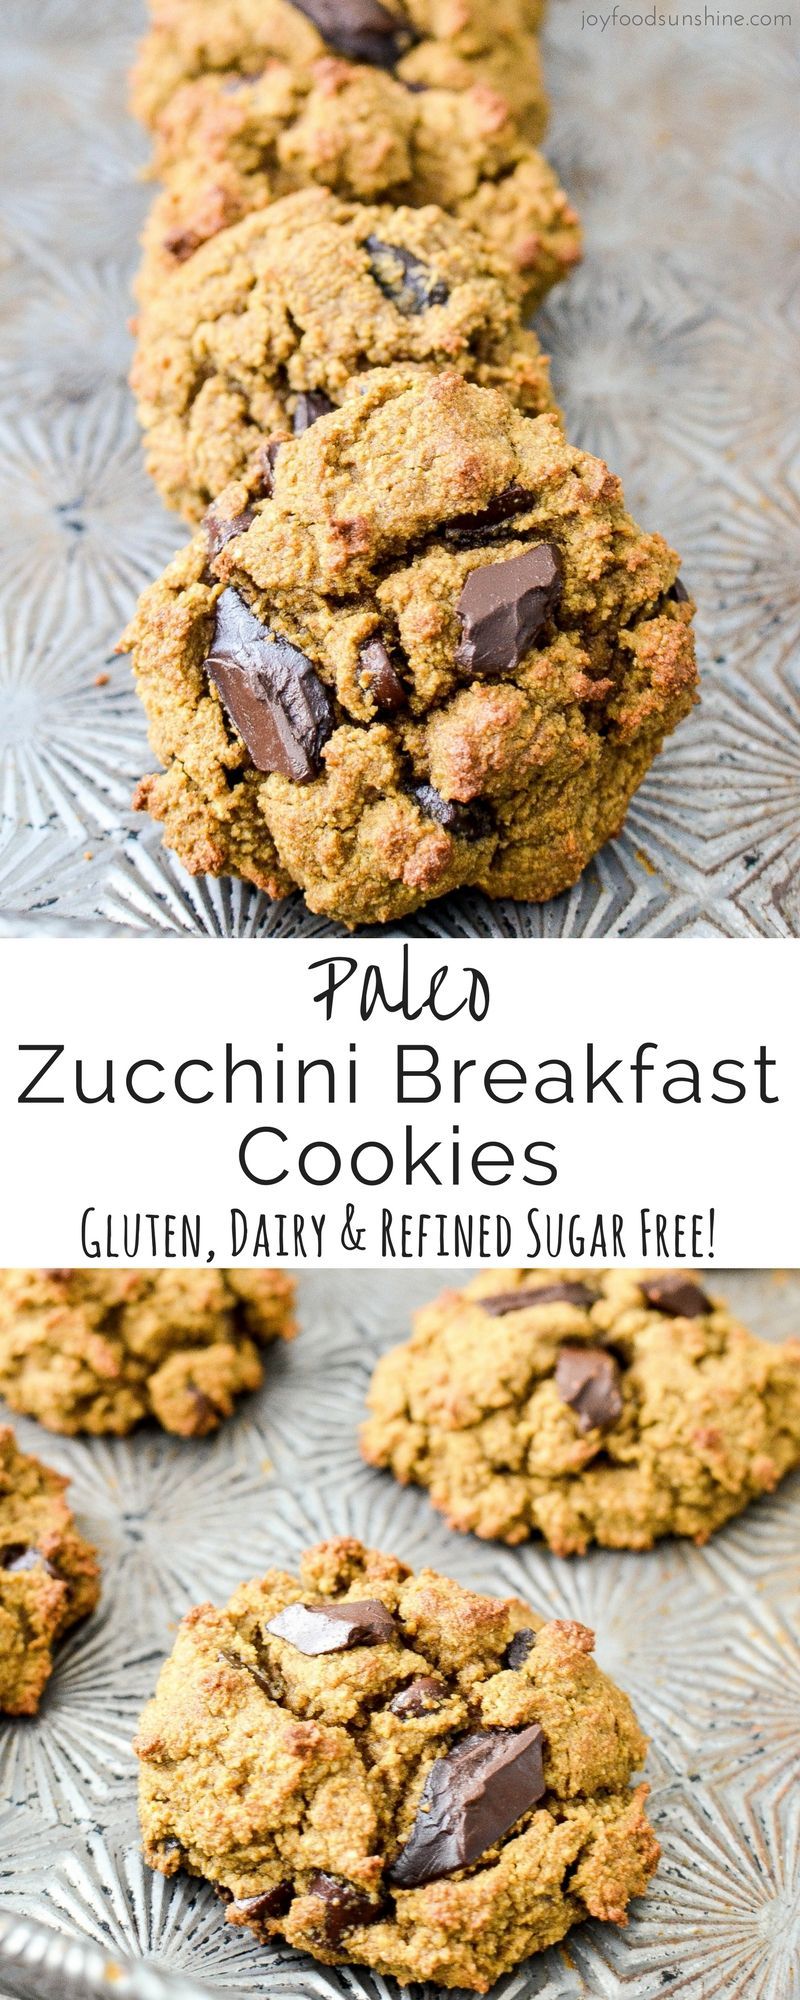 Paleo Zucchini Breakfast Cookies! A healthy and nutritious breakfast recipe loaded with sneaky veggies that tastes like dessert!